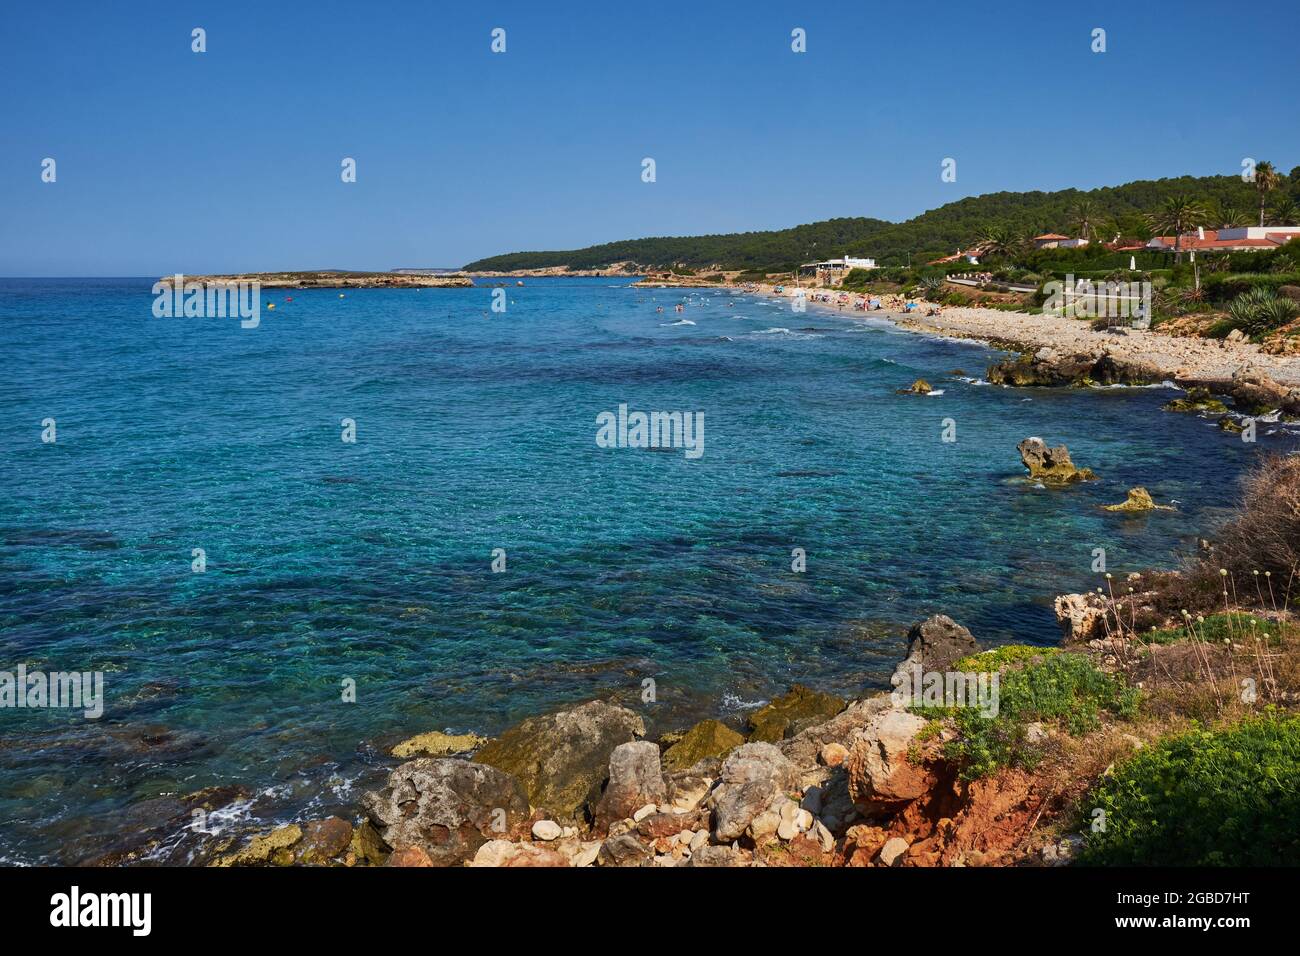 View of Sant Tomas beach on the island of Menorca in the Balearic Islands. Spain  Stock Photo